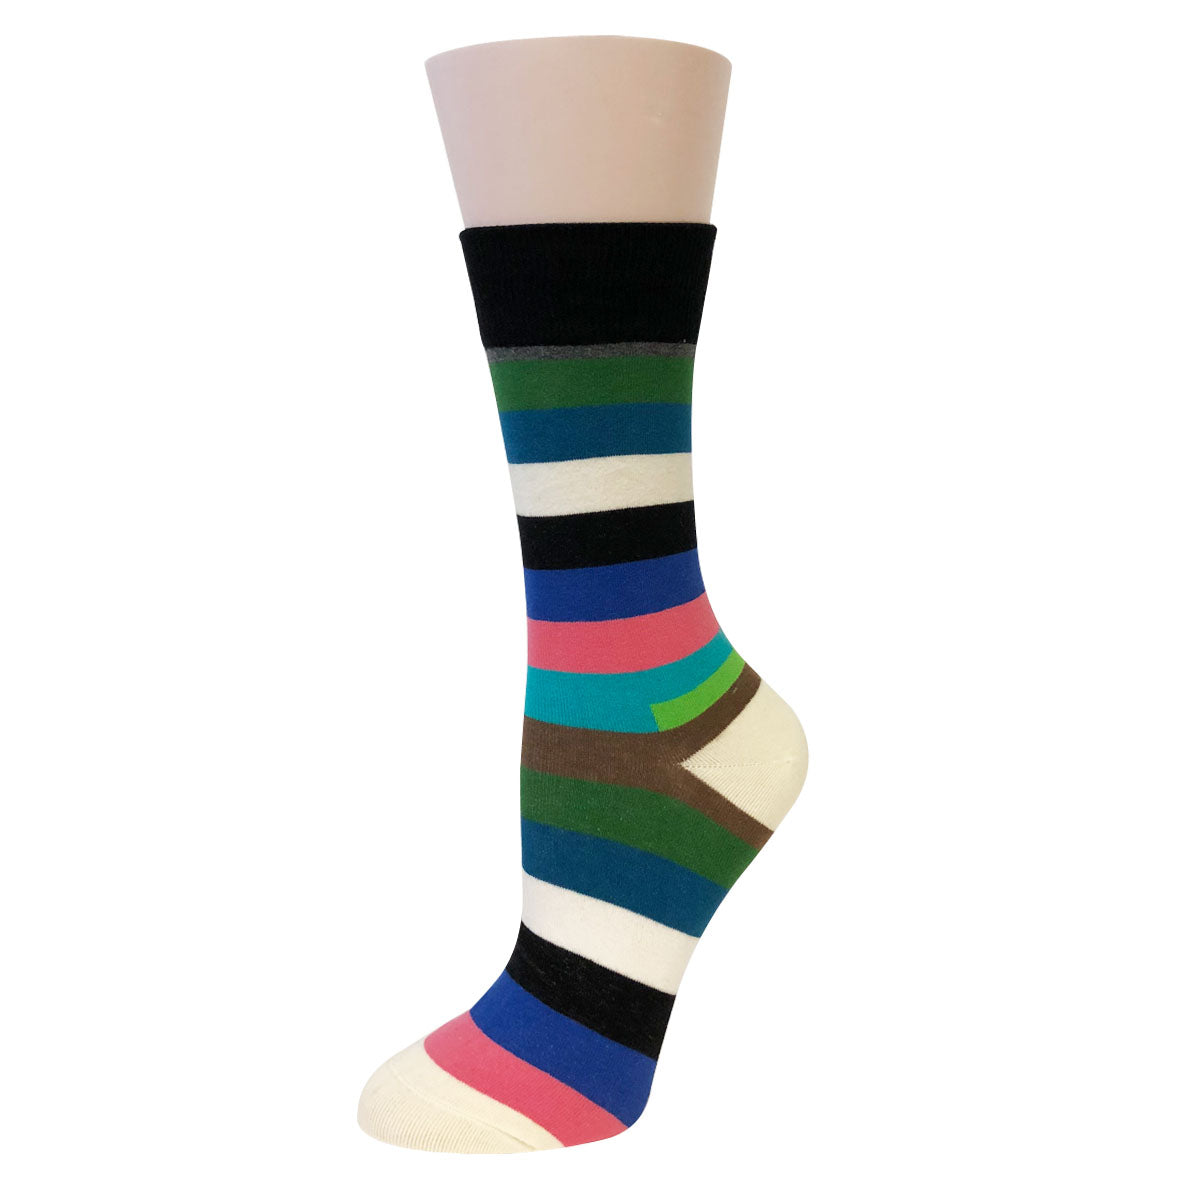 Wrapables® Unisex Colorful Designs Trouser Socks (Set of 5)